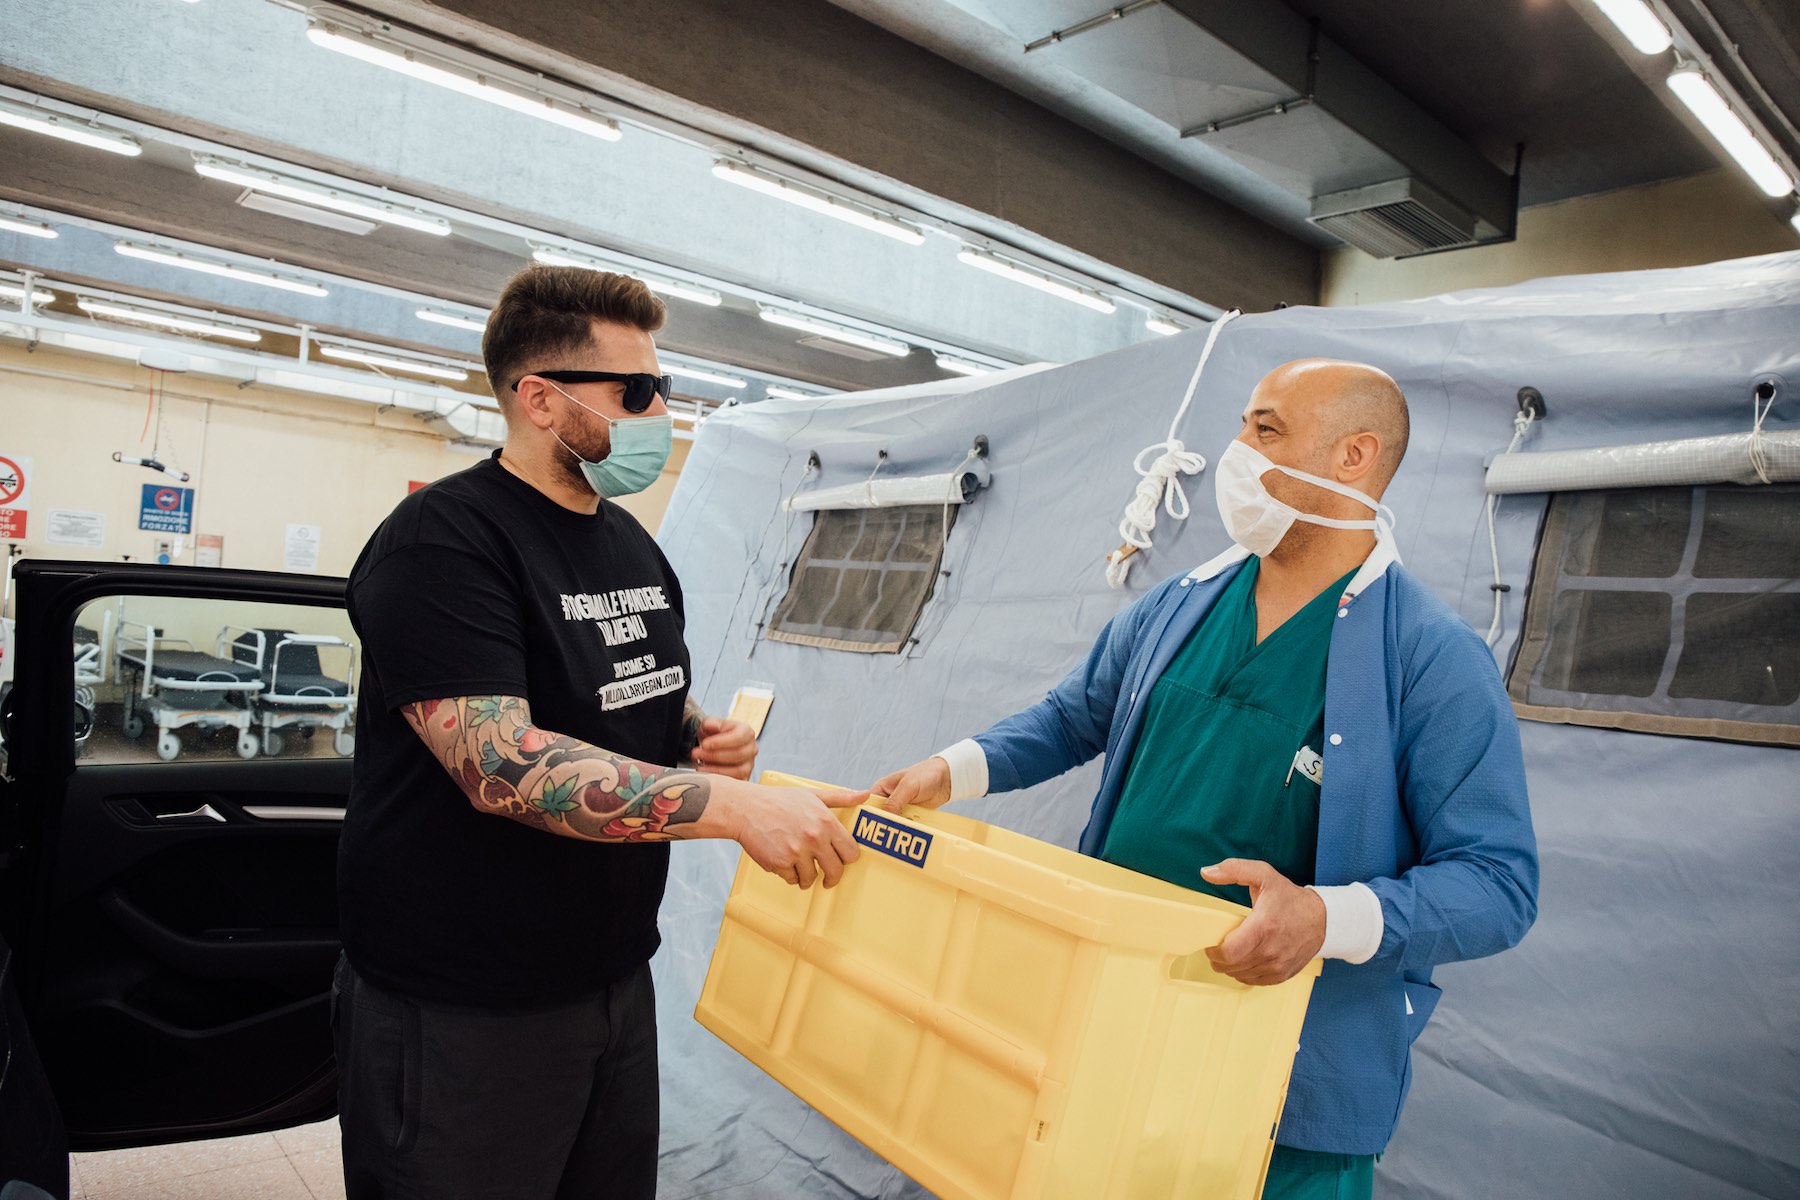 Delivering vegan food to hospitals in Italy